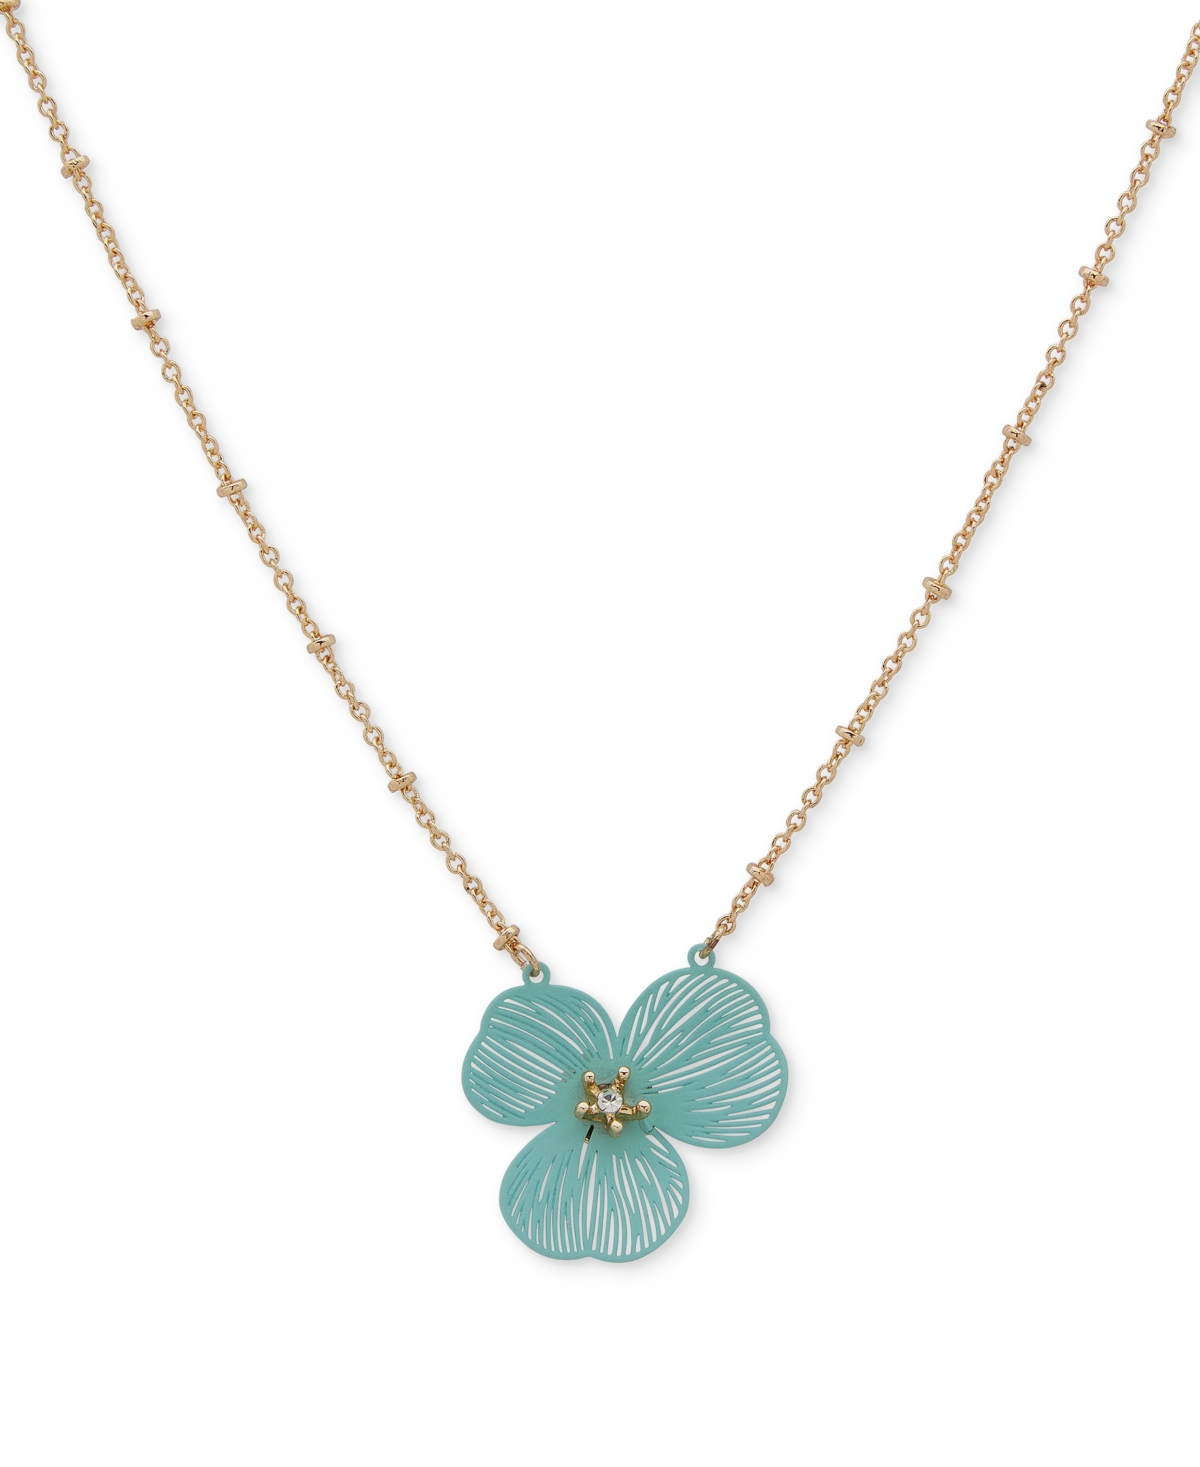 Lonna & Lilly Gold-tone Openwork Flower Pendant Necklace, 16" + 3" Extender In Seafoam